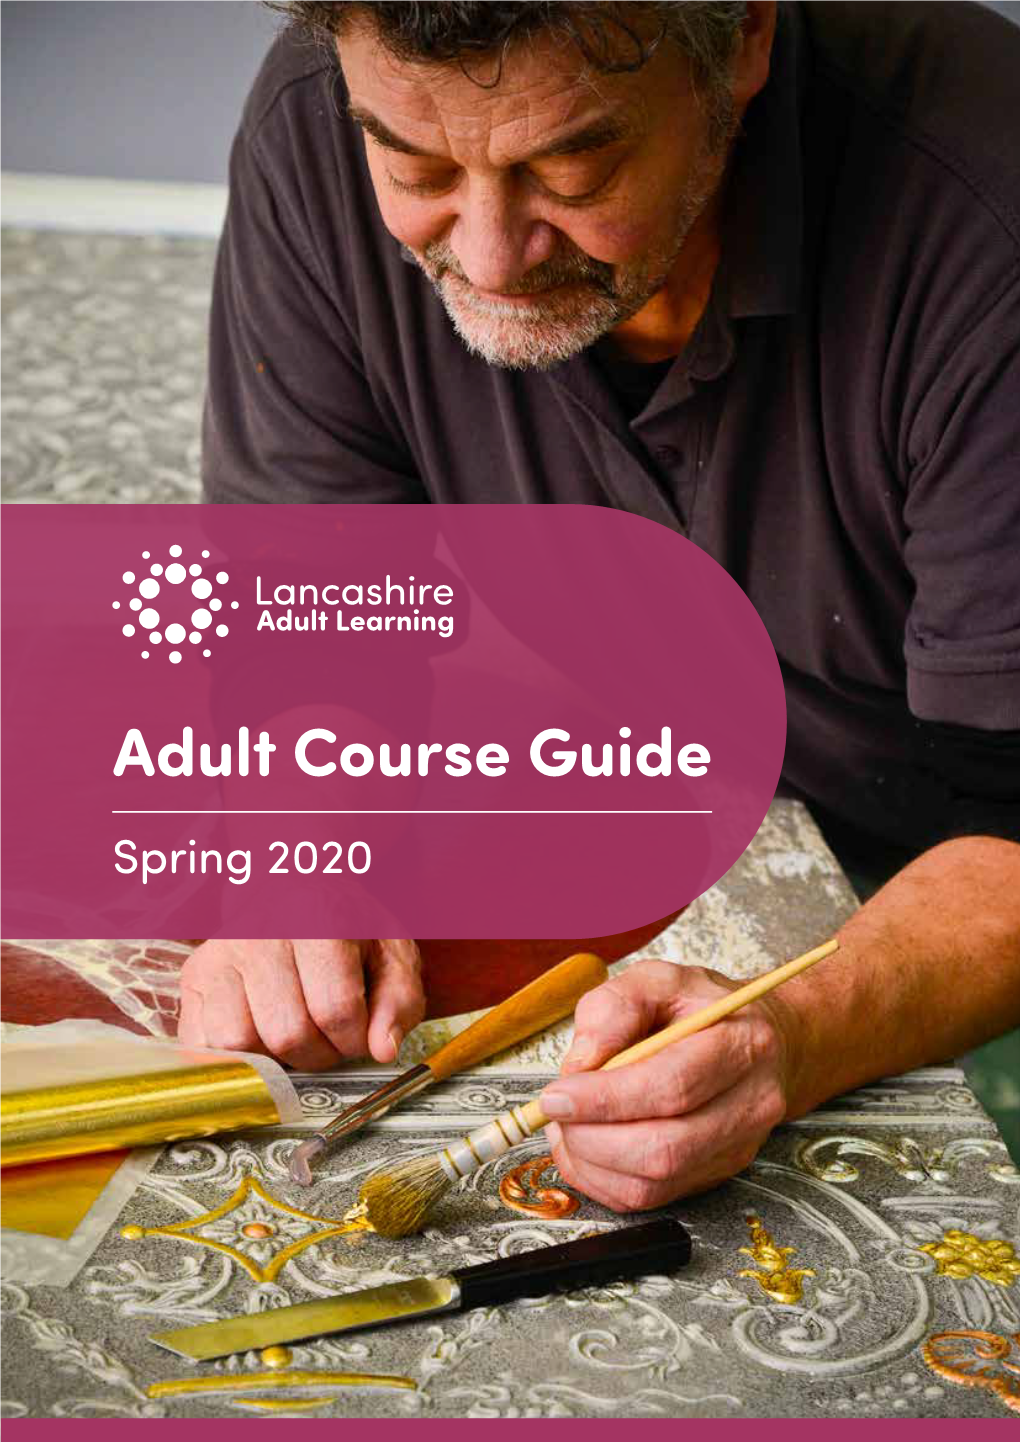 Adult Course Guide Spring 2020